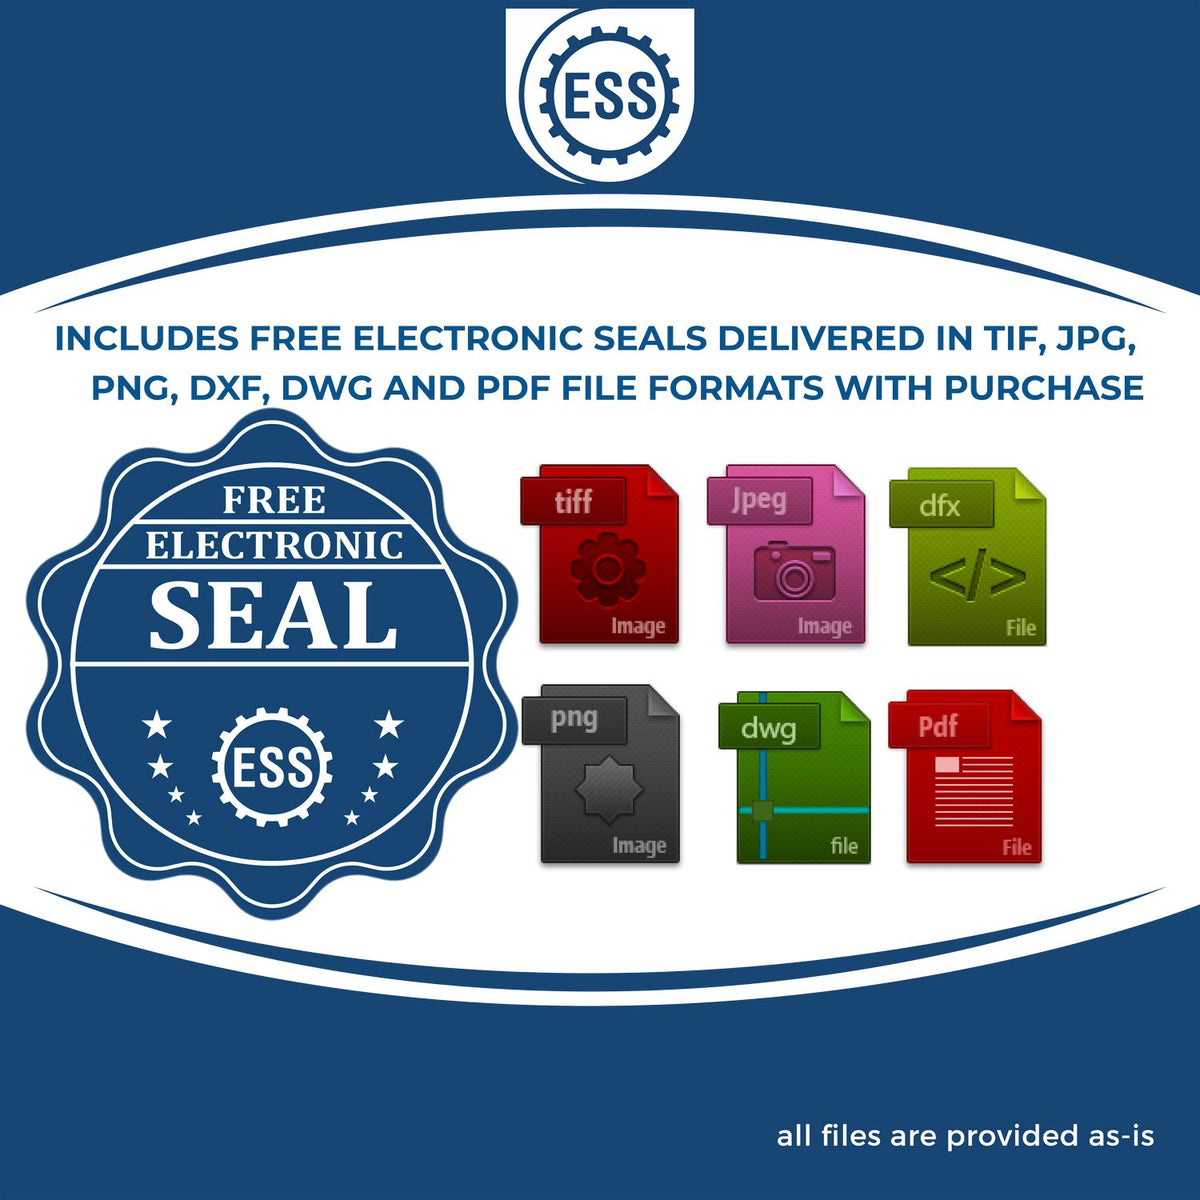 An infographic for the free electronic seal for the Tennessee Professional Engineer Seal Stamp illustrating the different file type icons such as DXF, DWG, TIF, JPG and PNG.